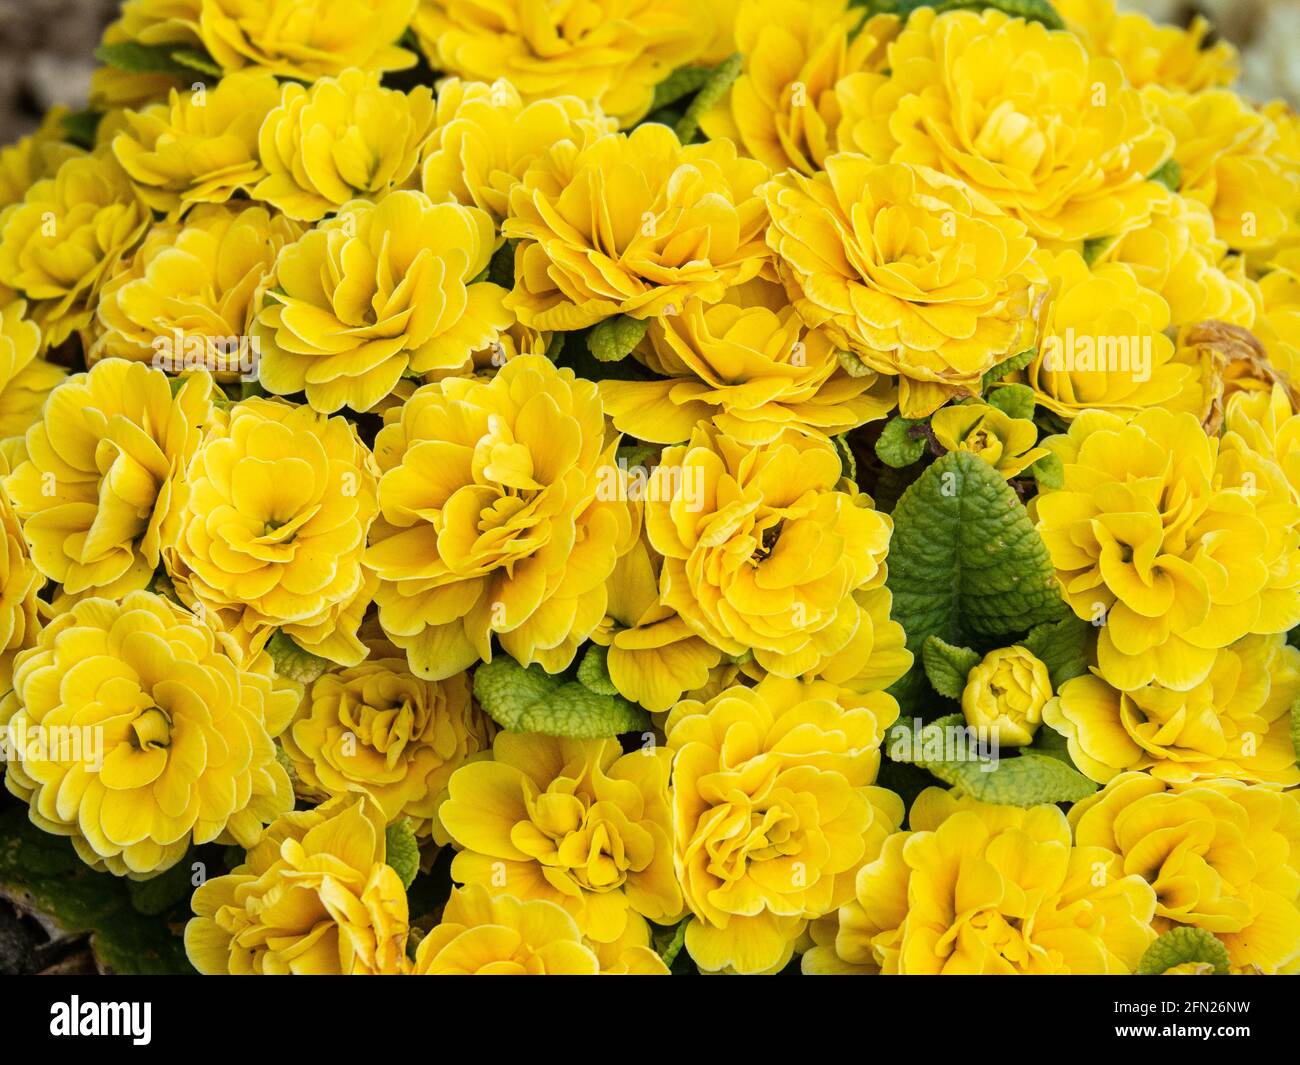 A plant of the double golden yellow primrose Primula Prima Balarina Goldie covered in flowers Stock Photo